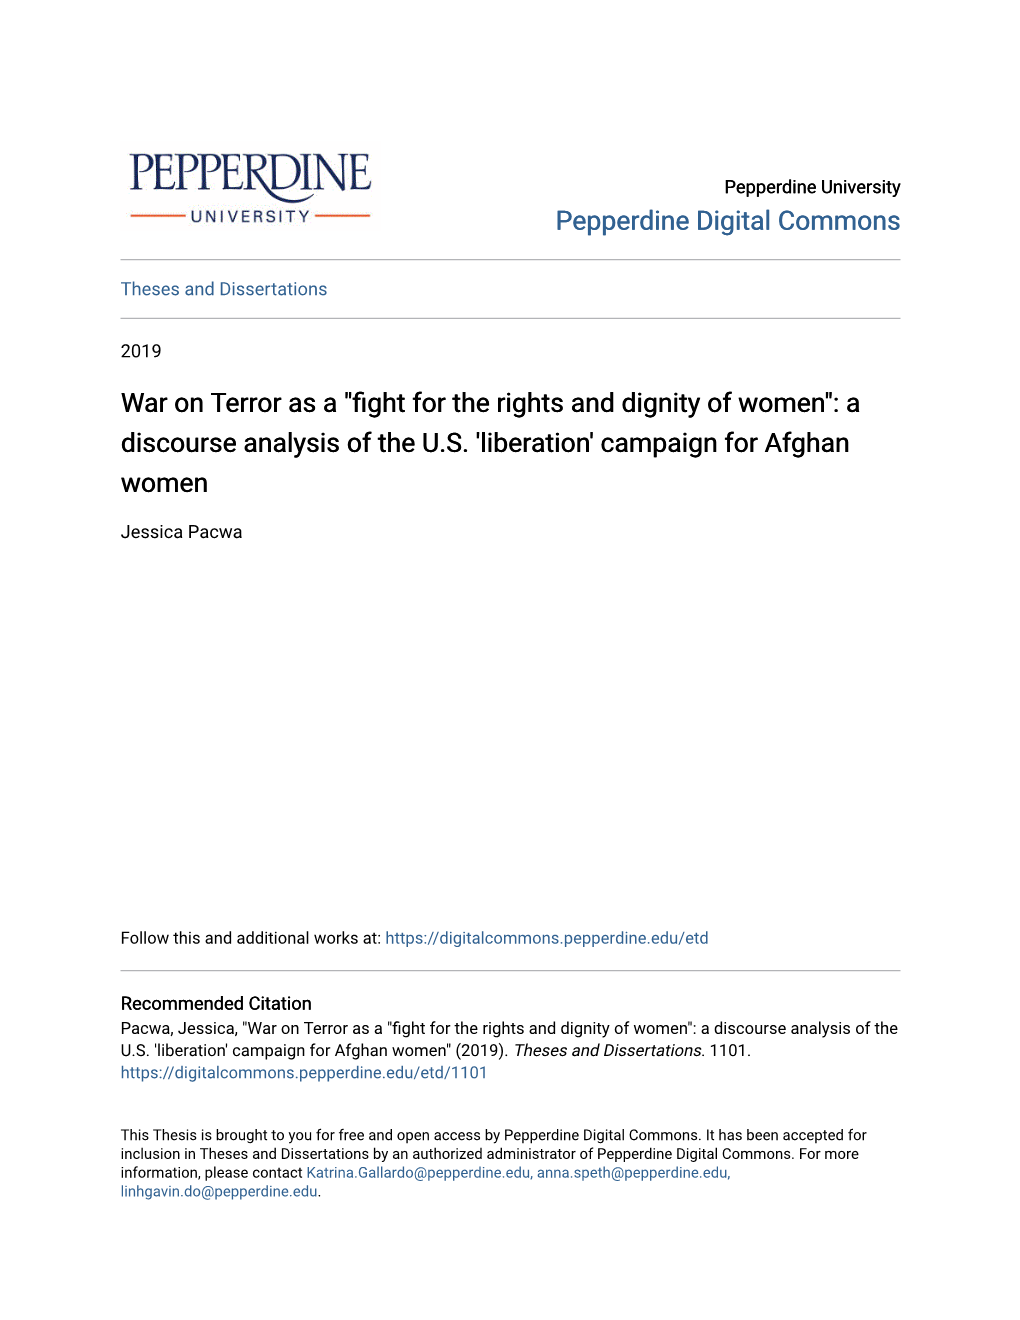 War on Terror As a "Fight for the Rights and Dignity of Women": a Discourse Analysis of the U.S